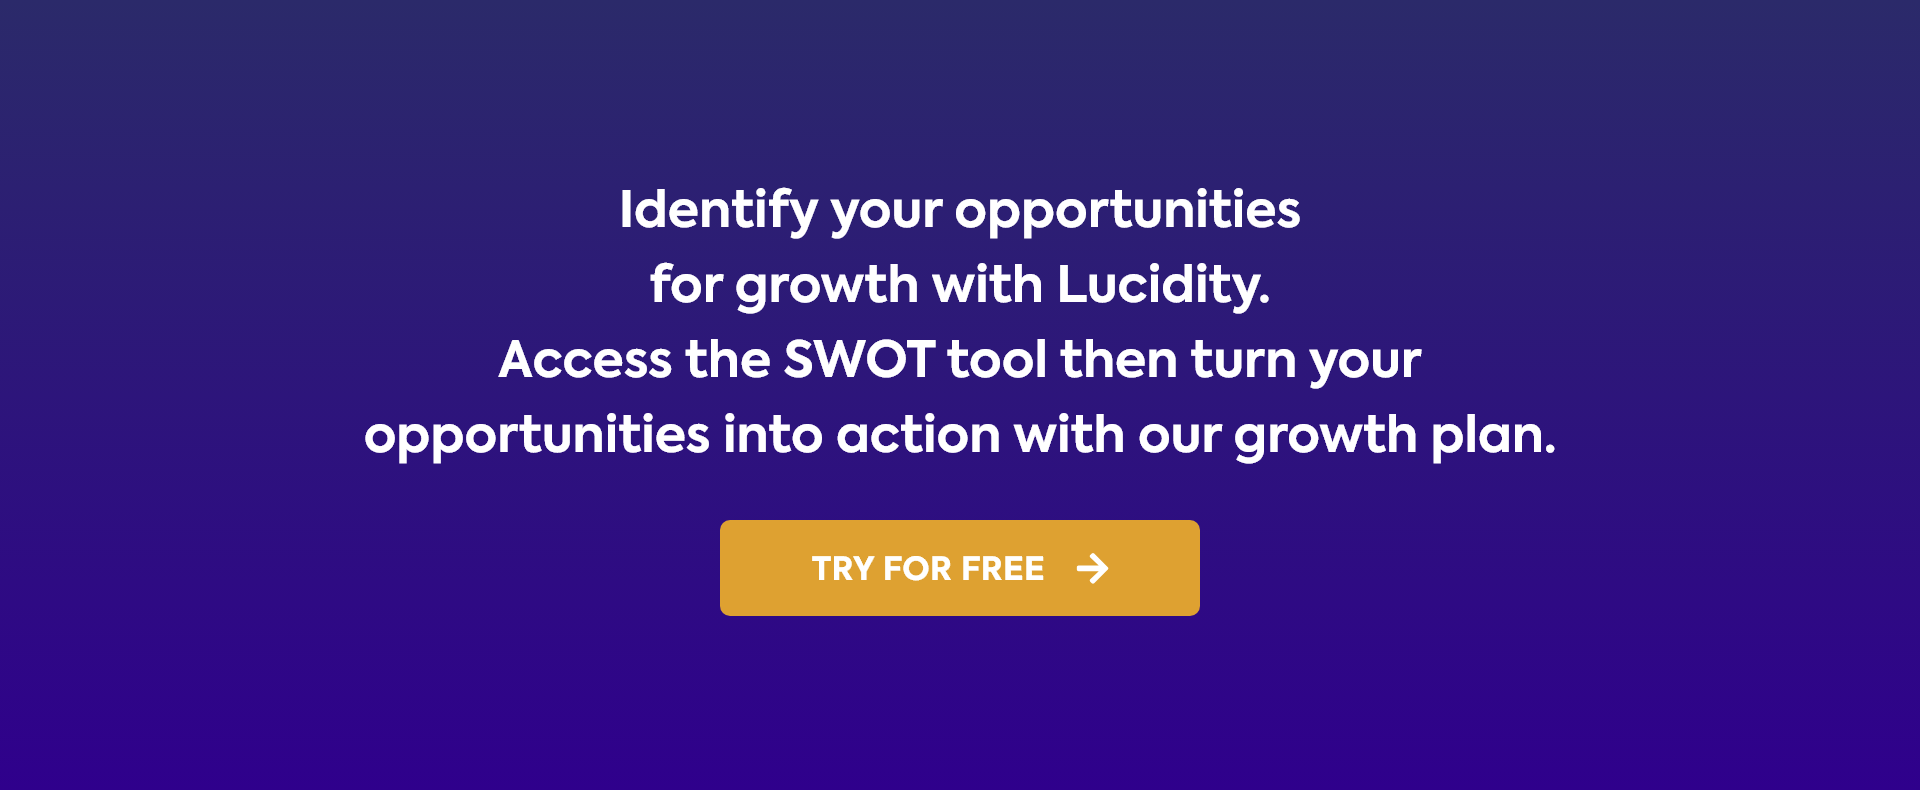 Identify your opportunities for growth with Lucidity